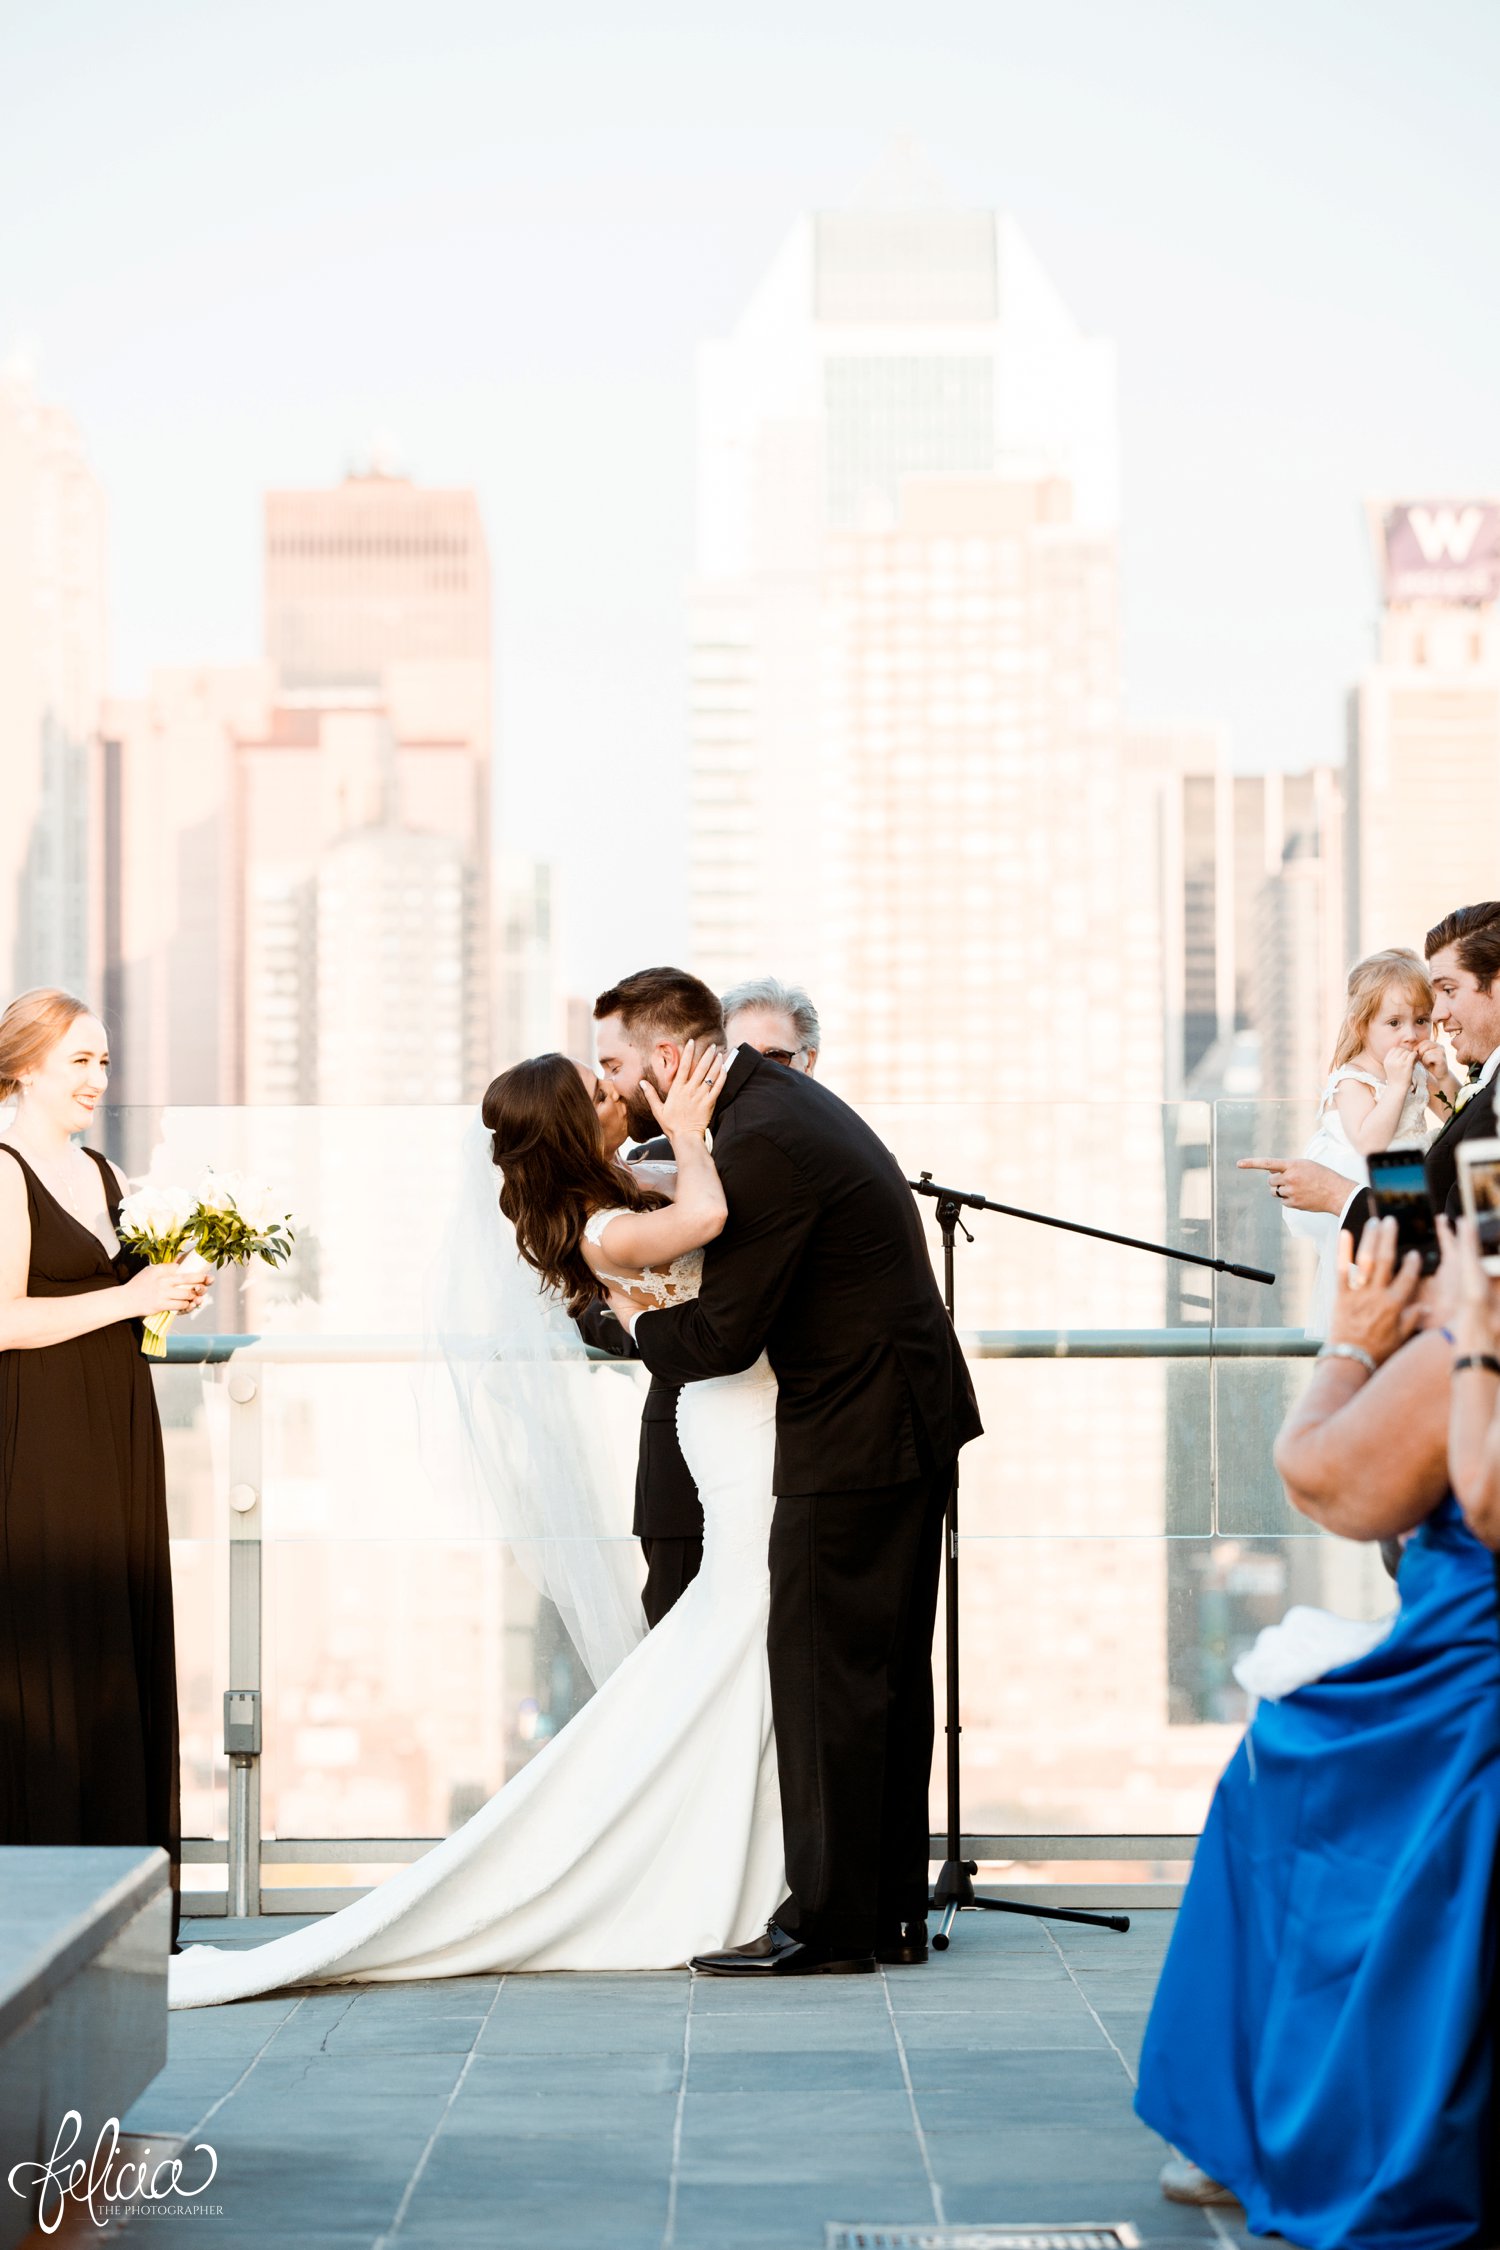 images by feliciathephotographer.com | destination wedding photographer | new york city | ceremony | rooftop | skyline | urban | romantic | classic | emotional | bride and groom | long white gown | lace details | open back | black tuxedo | mens warehouse | pronovais | nordstrom | first kiss | 